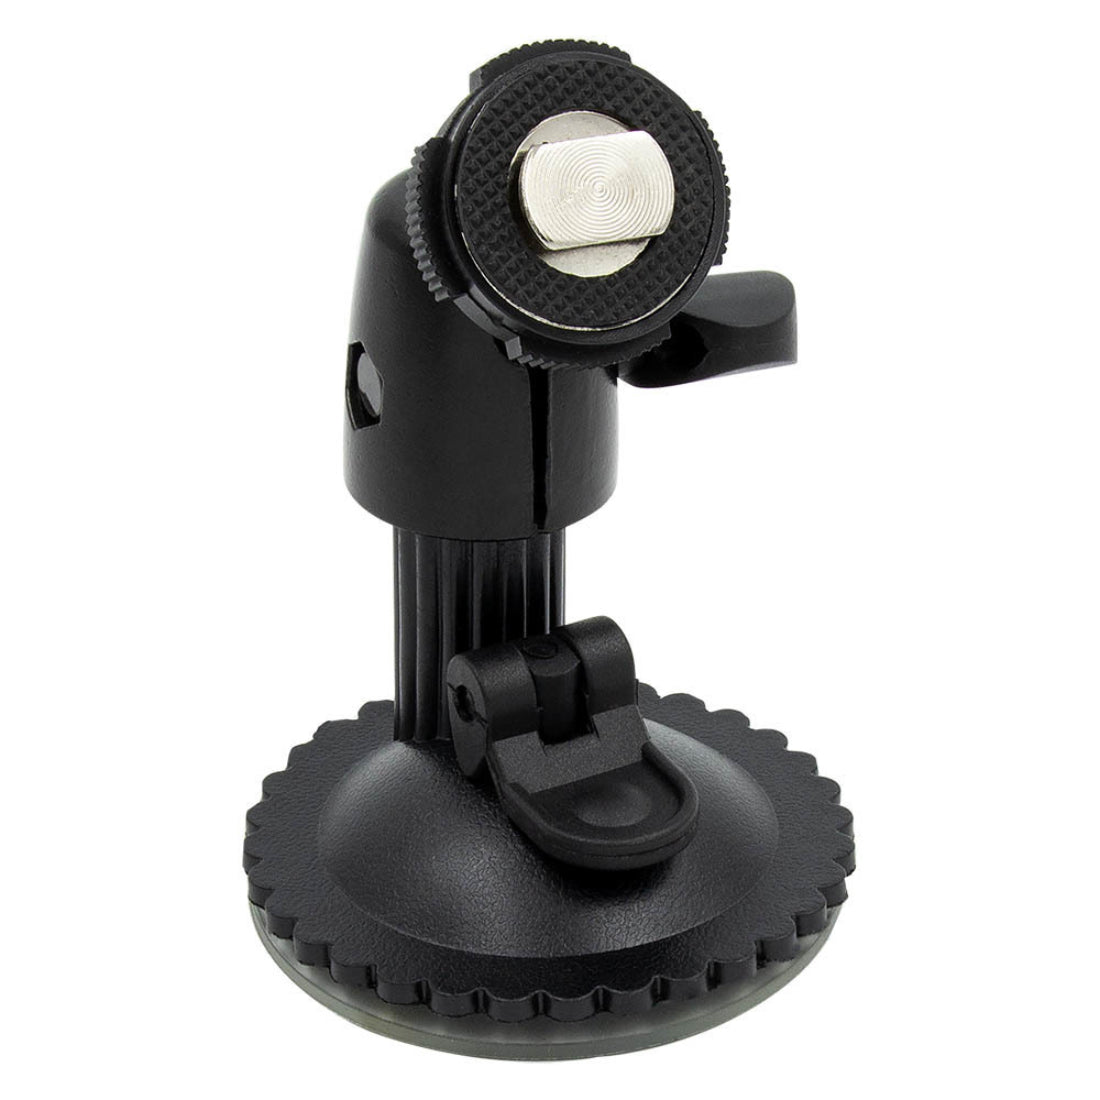 iBeam TE-MMWS Universal Windshield Suction Cup Monitor Mount